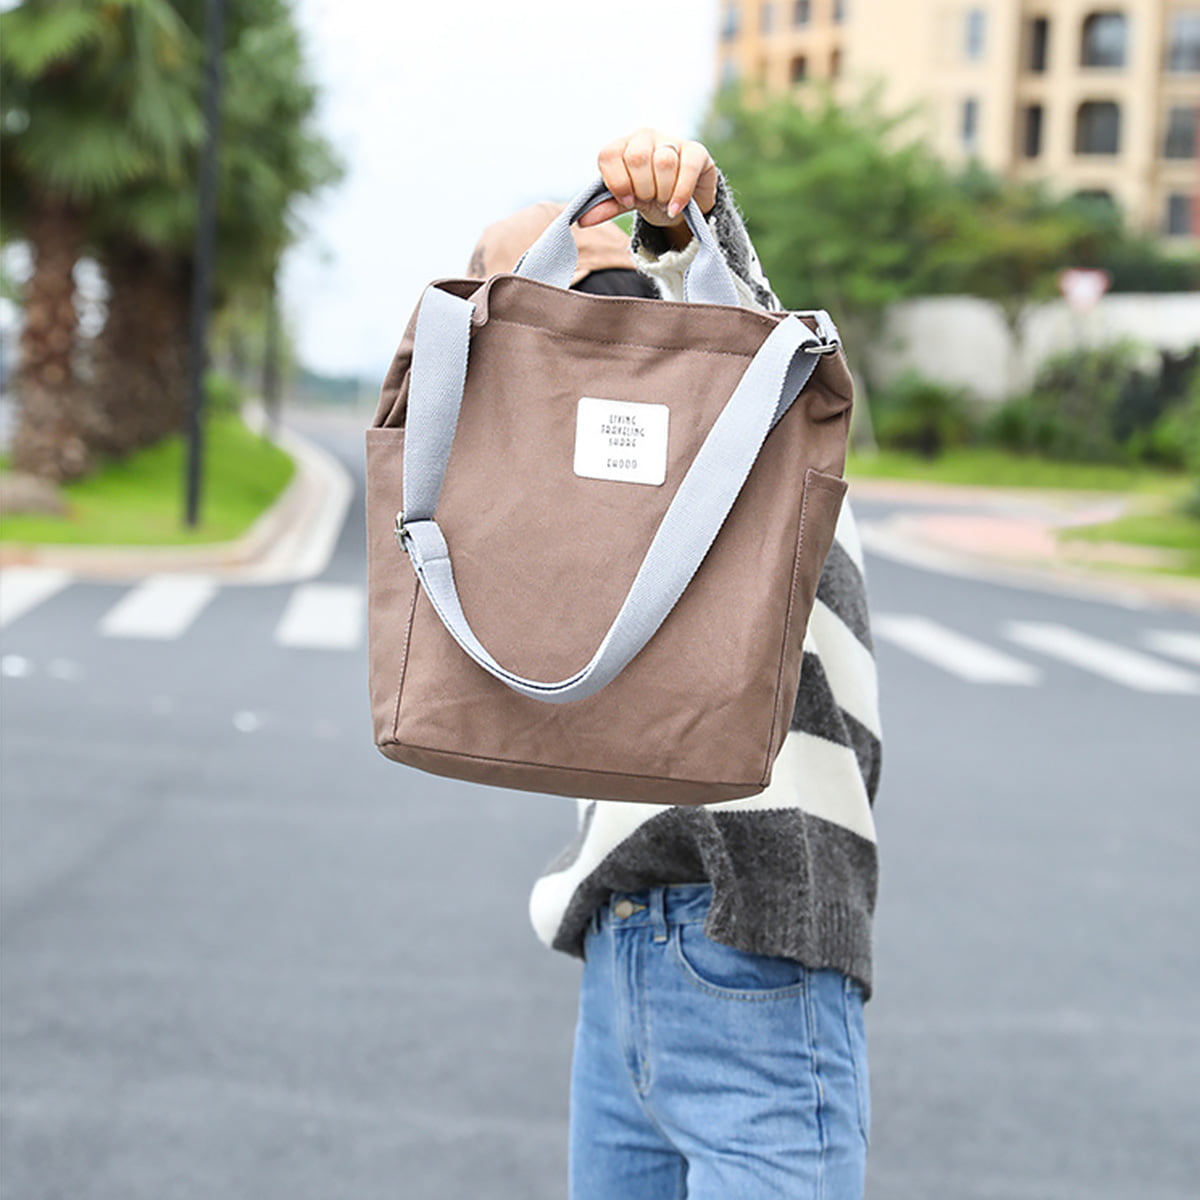 Pastel Aesthetic Canvas Tote Bag